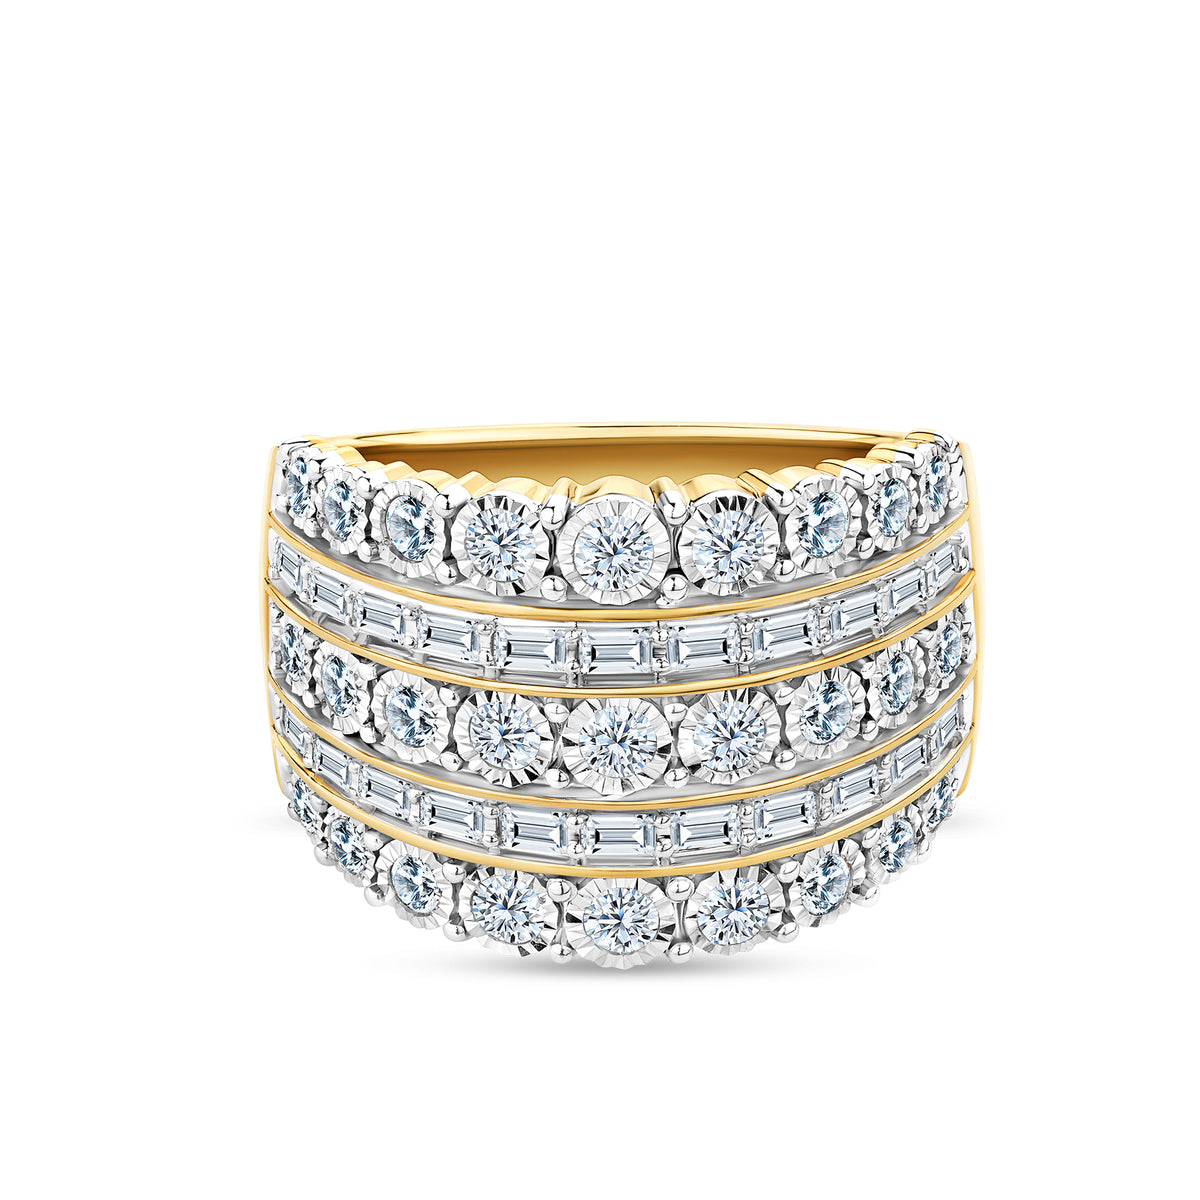 1.00ct TW Diamond Cluster Dress Ring in 9ct Yellow Gold